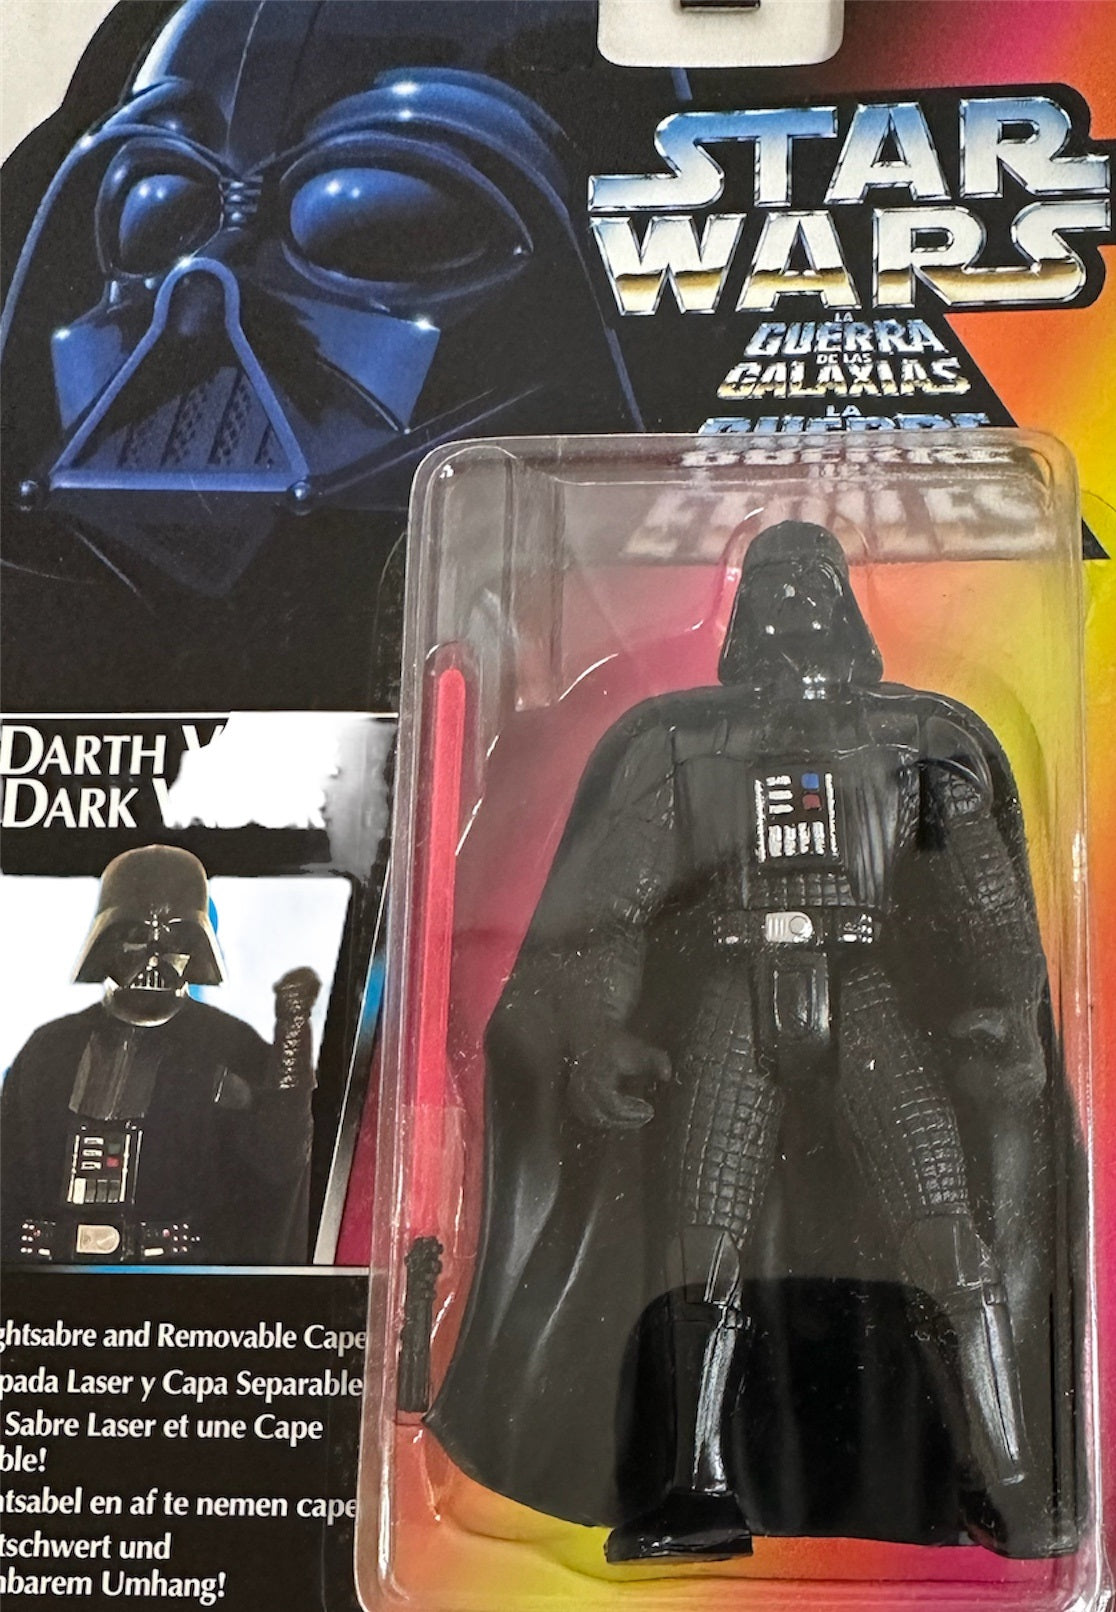 Vintage 1995 Star Wars The Power Of The Force Red Card Darth Vader / Dark Vador Action Figure - Brand New Factory Sealed Shop Stock Room Find